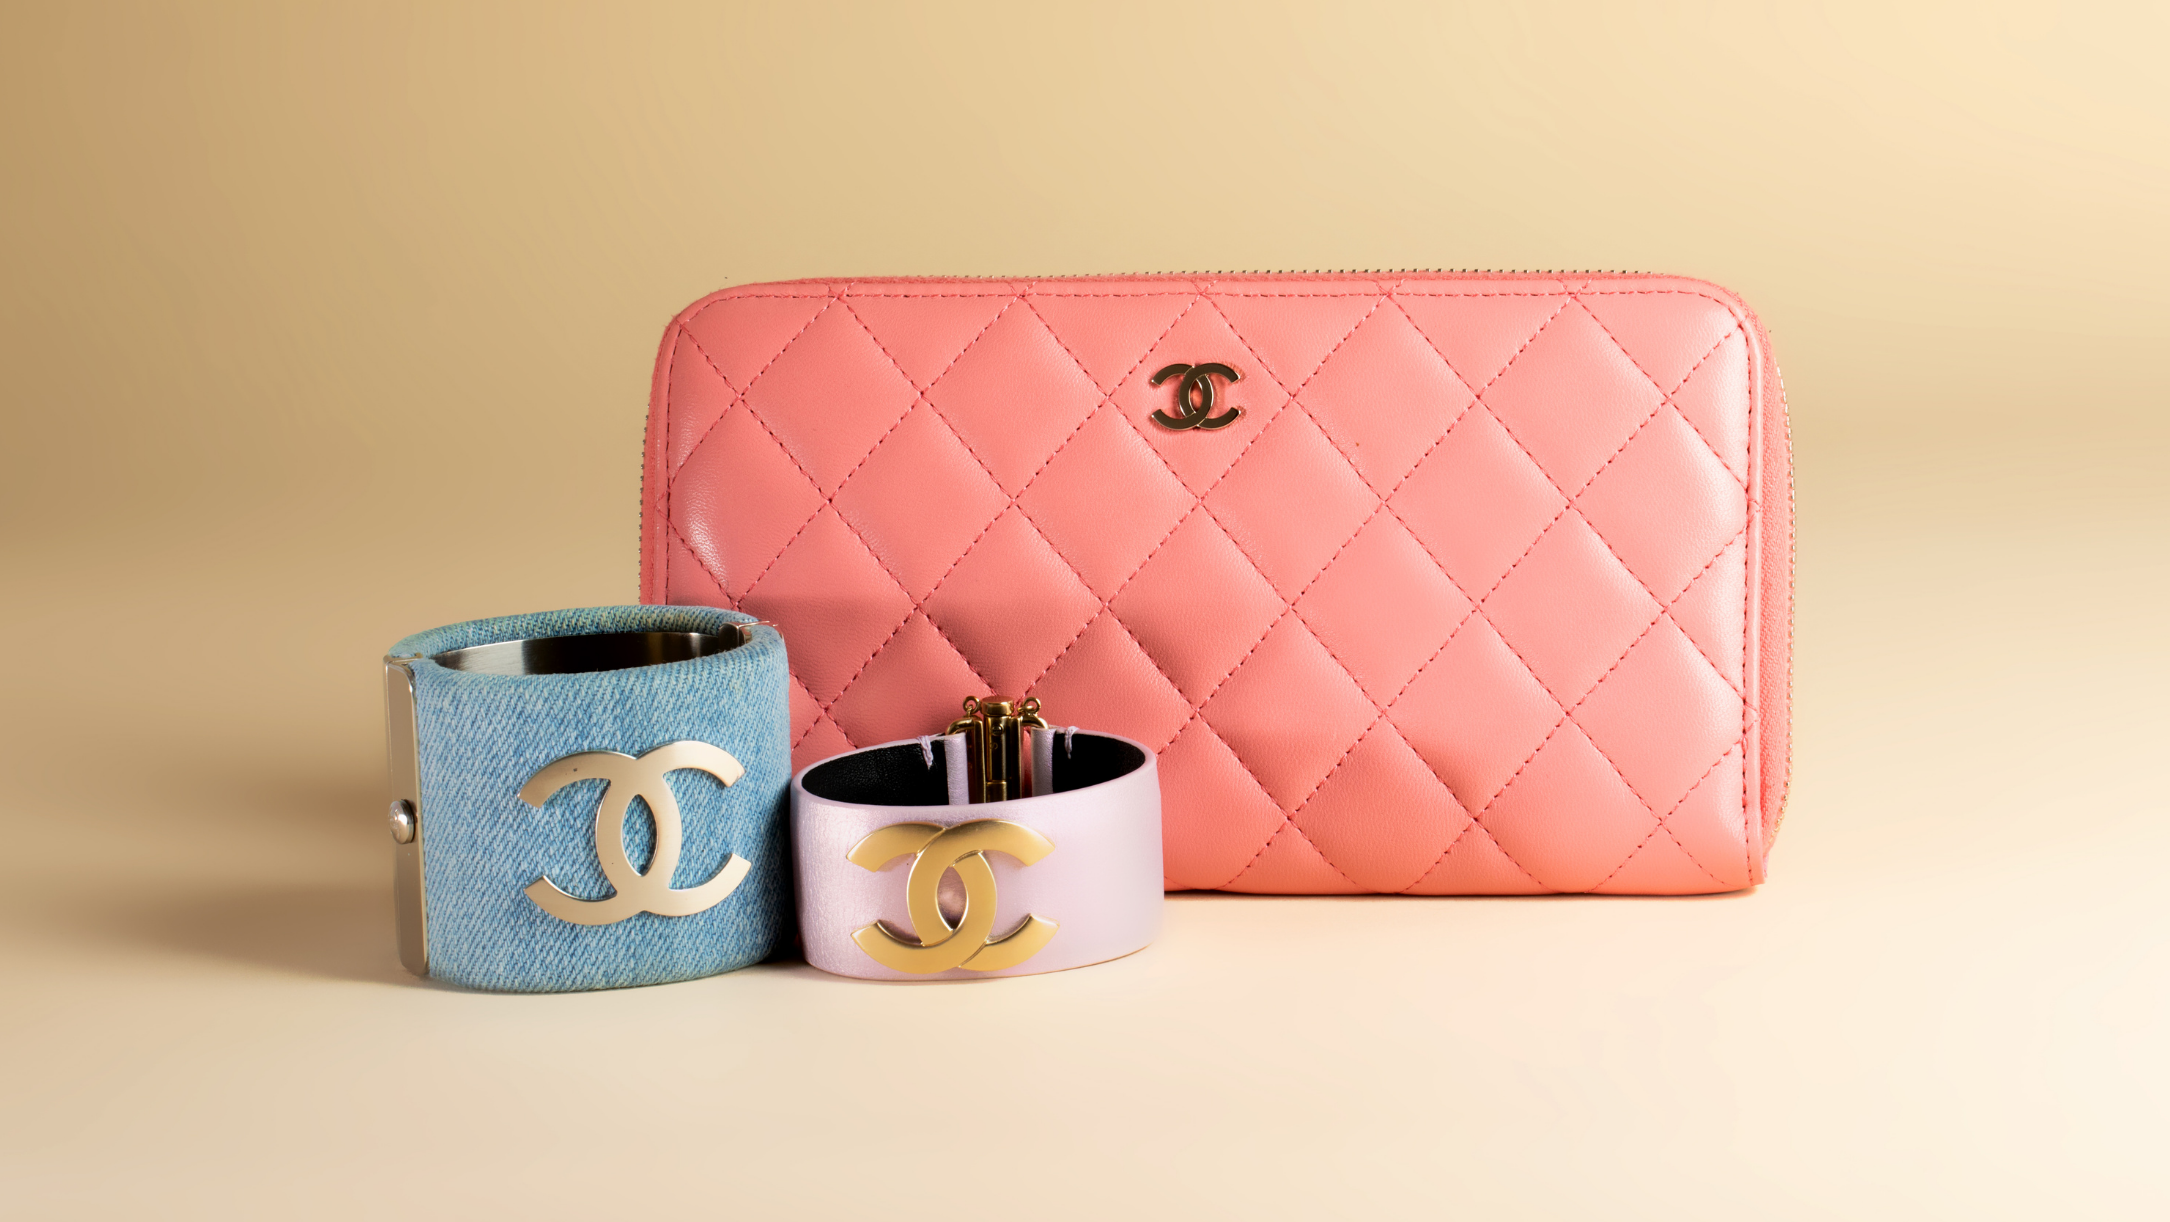 Chanel Pink Quilted Lambskin Pearl Crush Mini Vanity Case, myGemma, SG